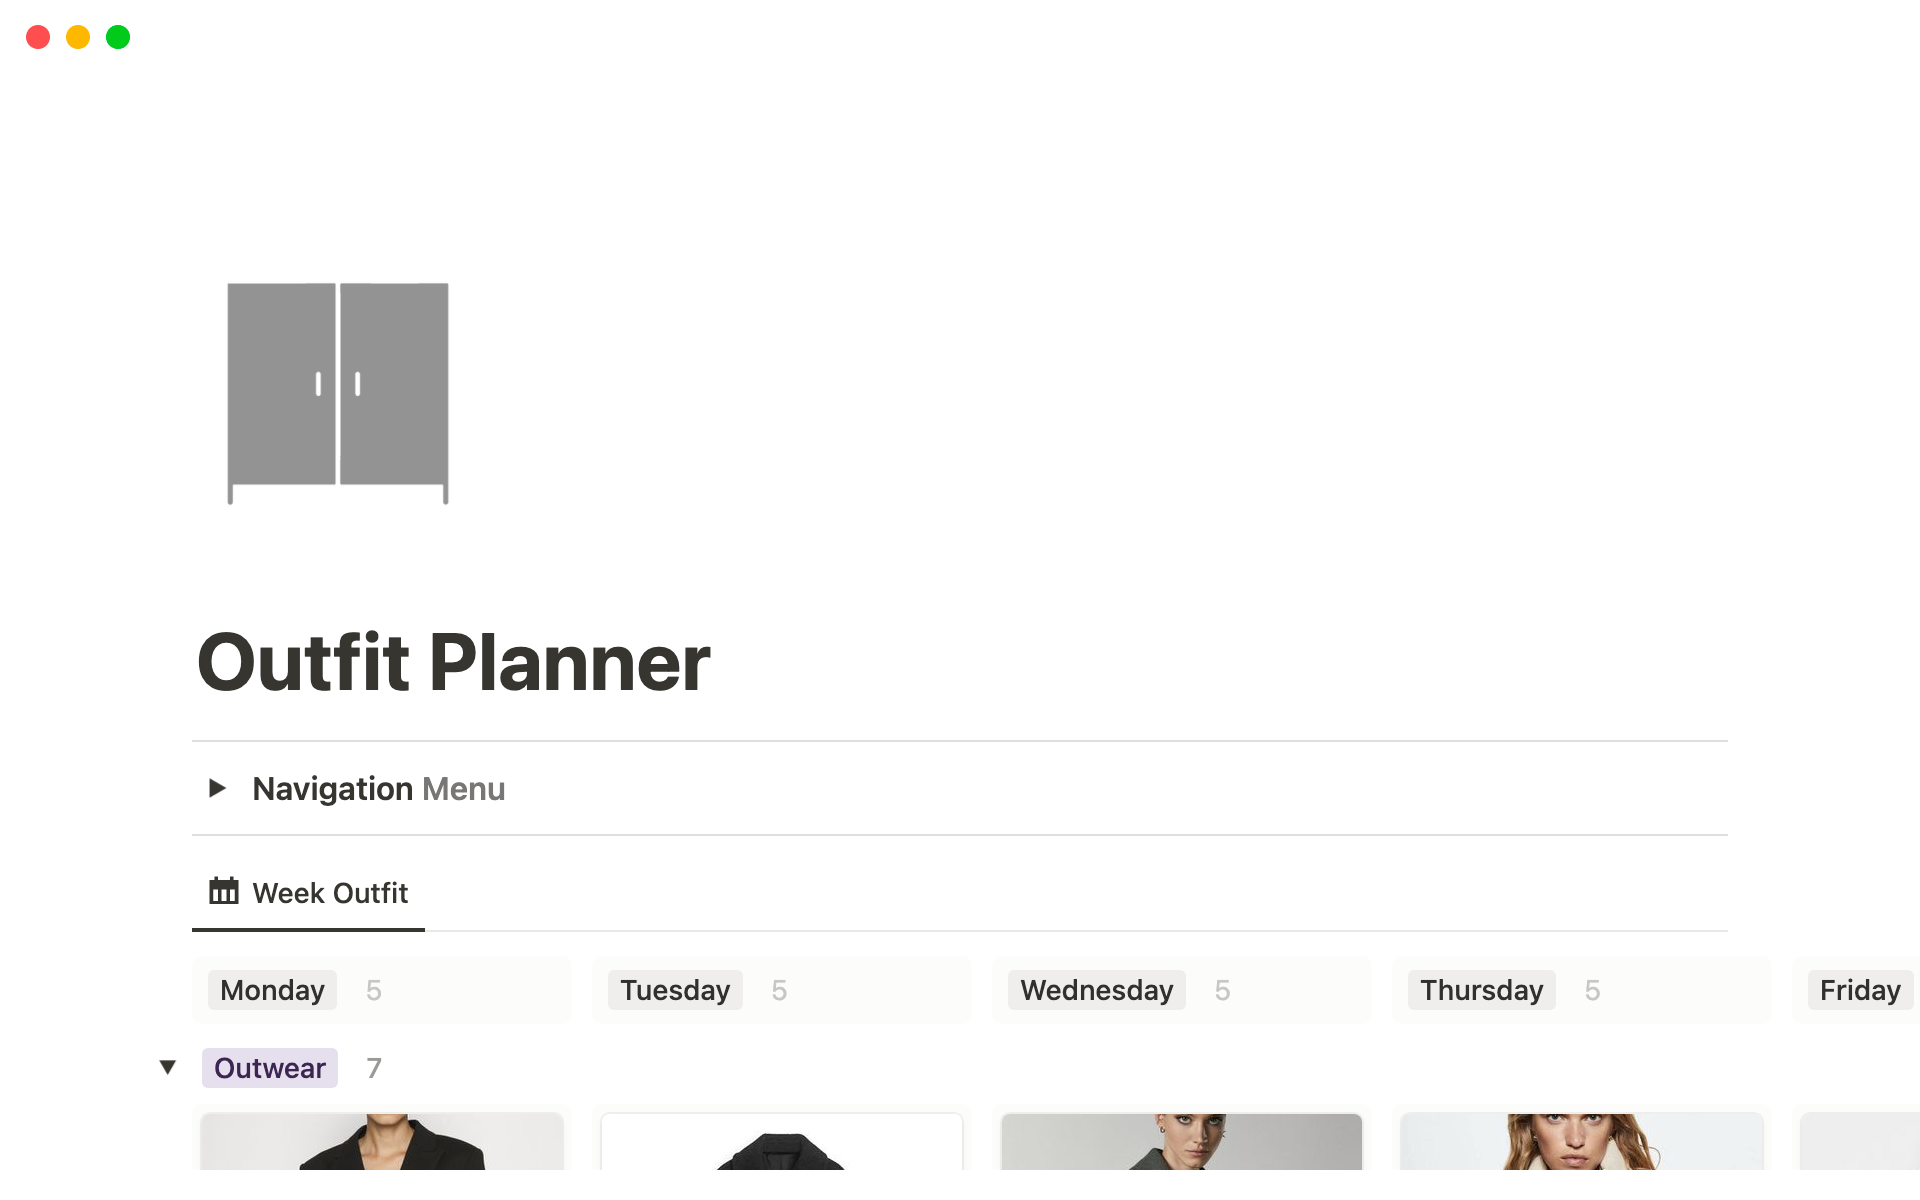 The Ultimate Outfit Planner is designed to help you digitalize your wardrobe, get clarity on your style and plan your outfit by week.